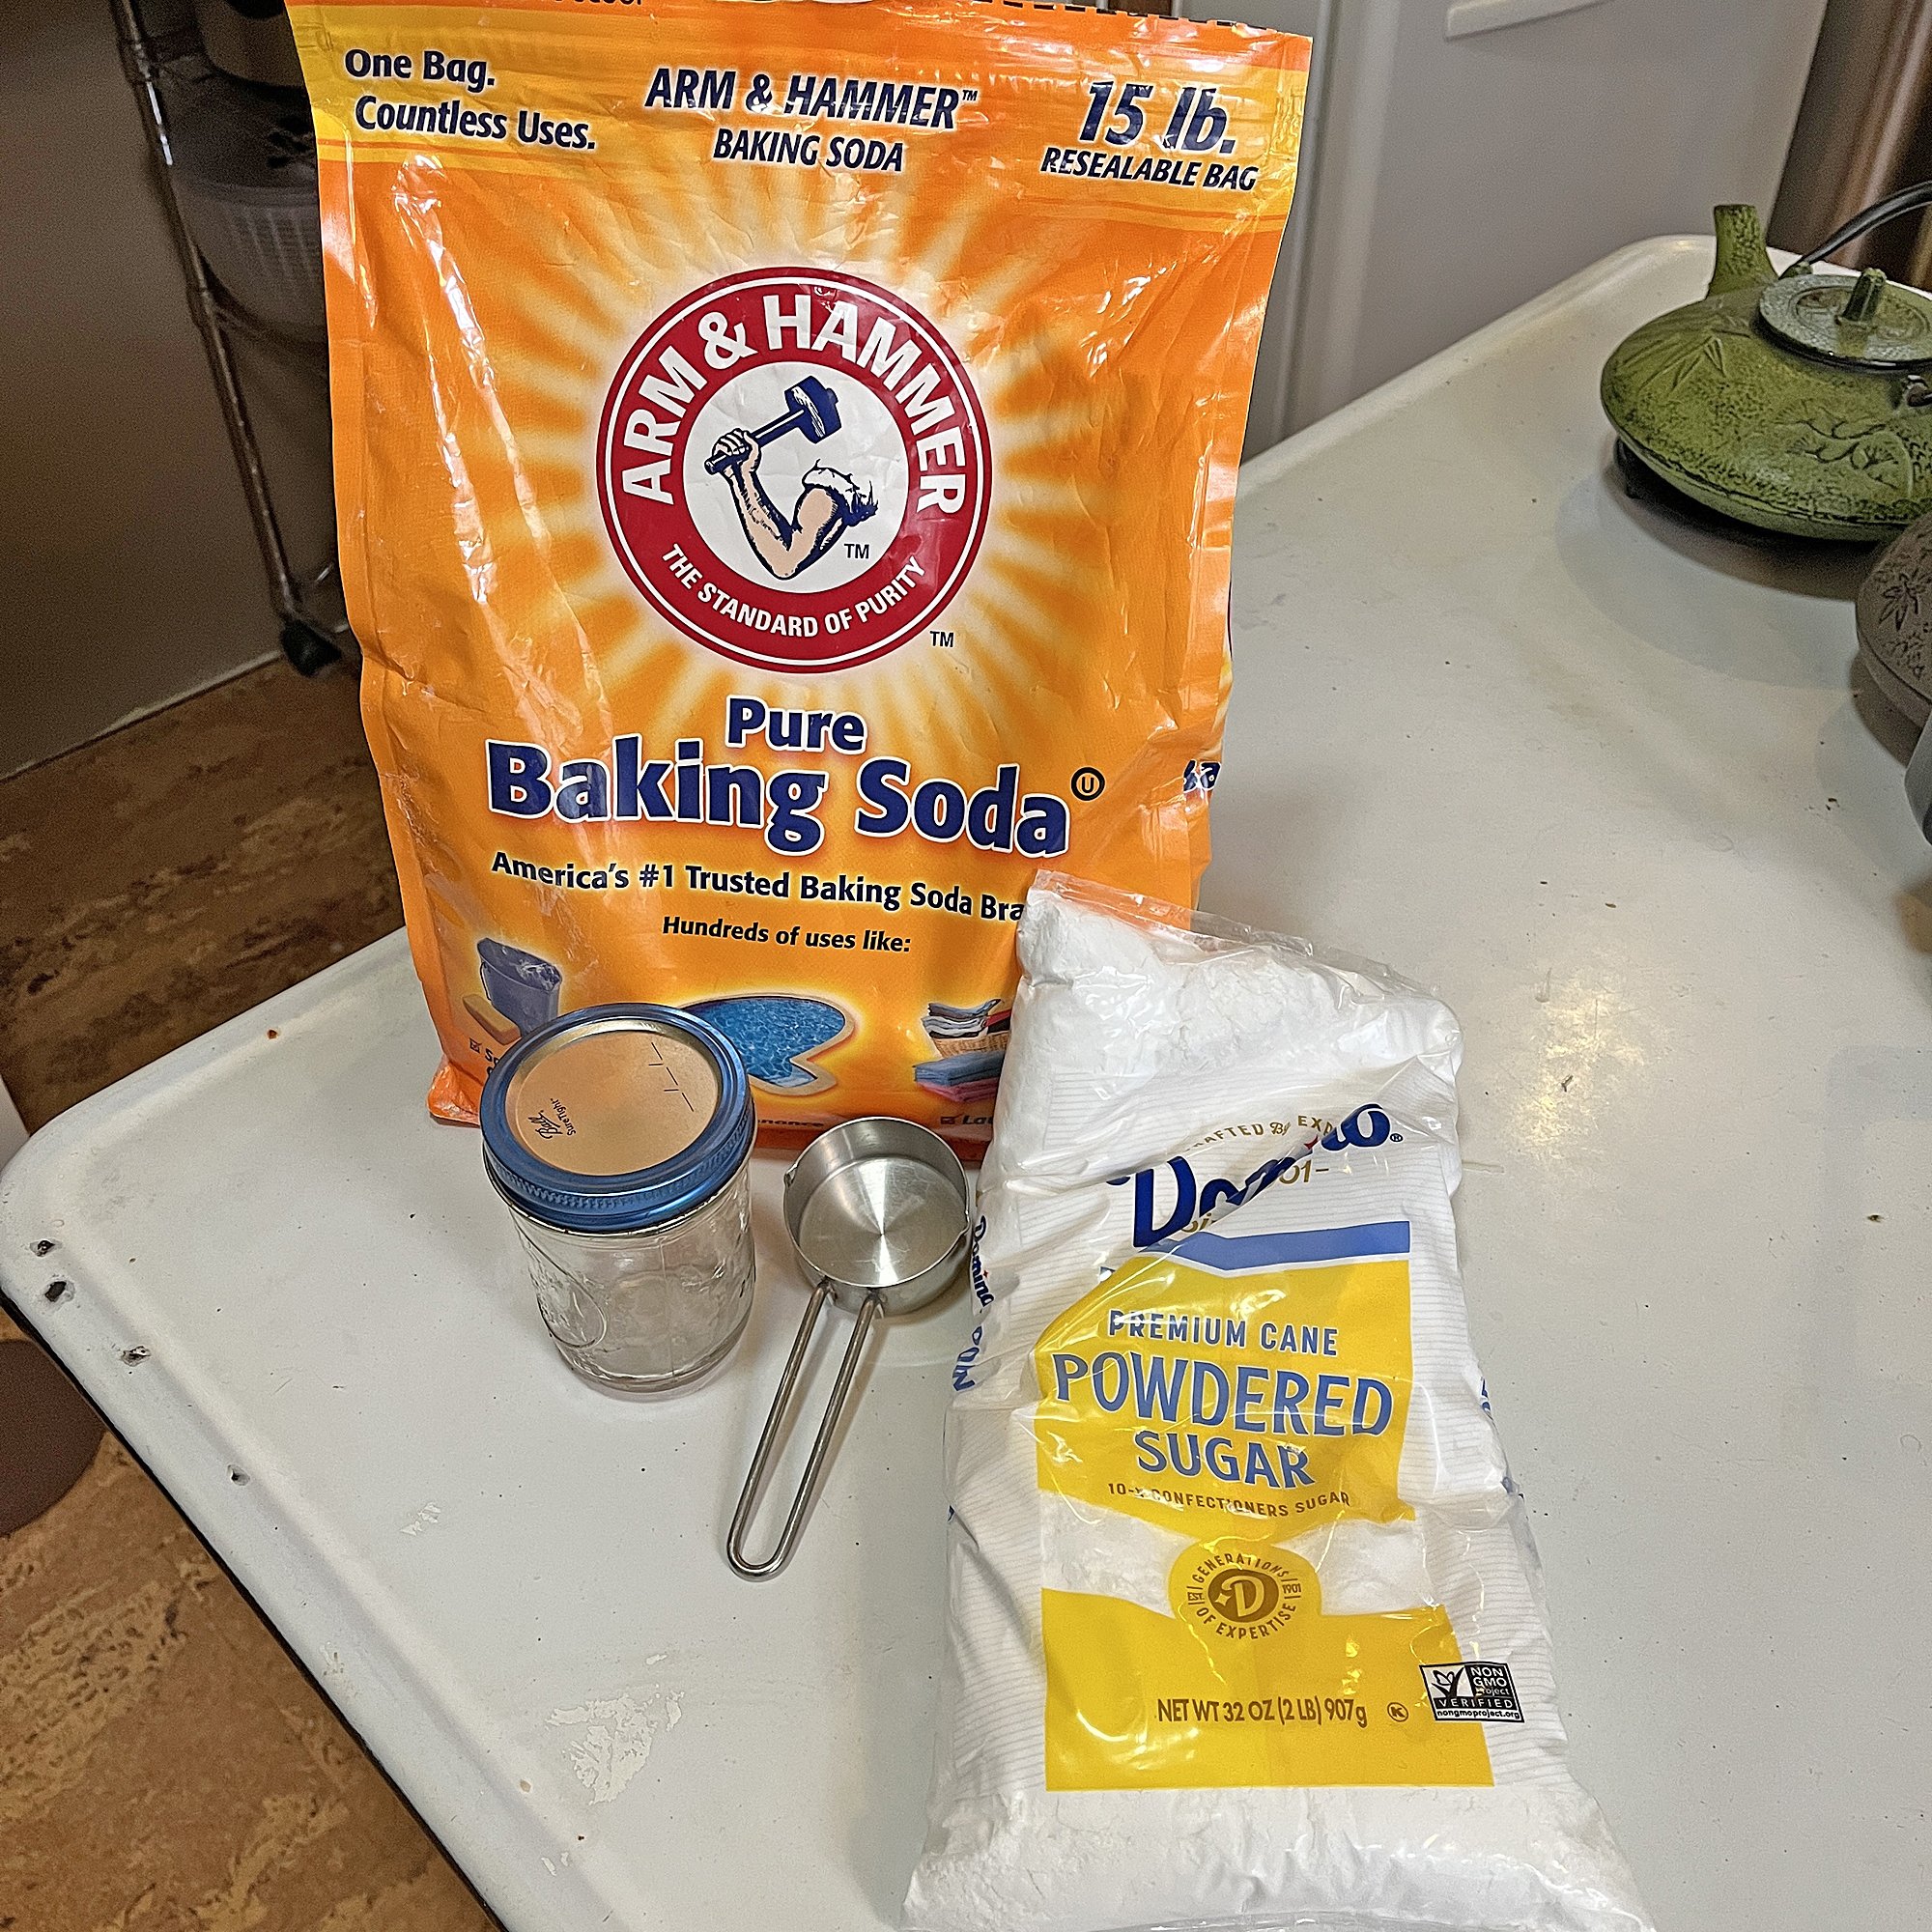 Gather supplies (your bag of baking soda may be smaller).